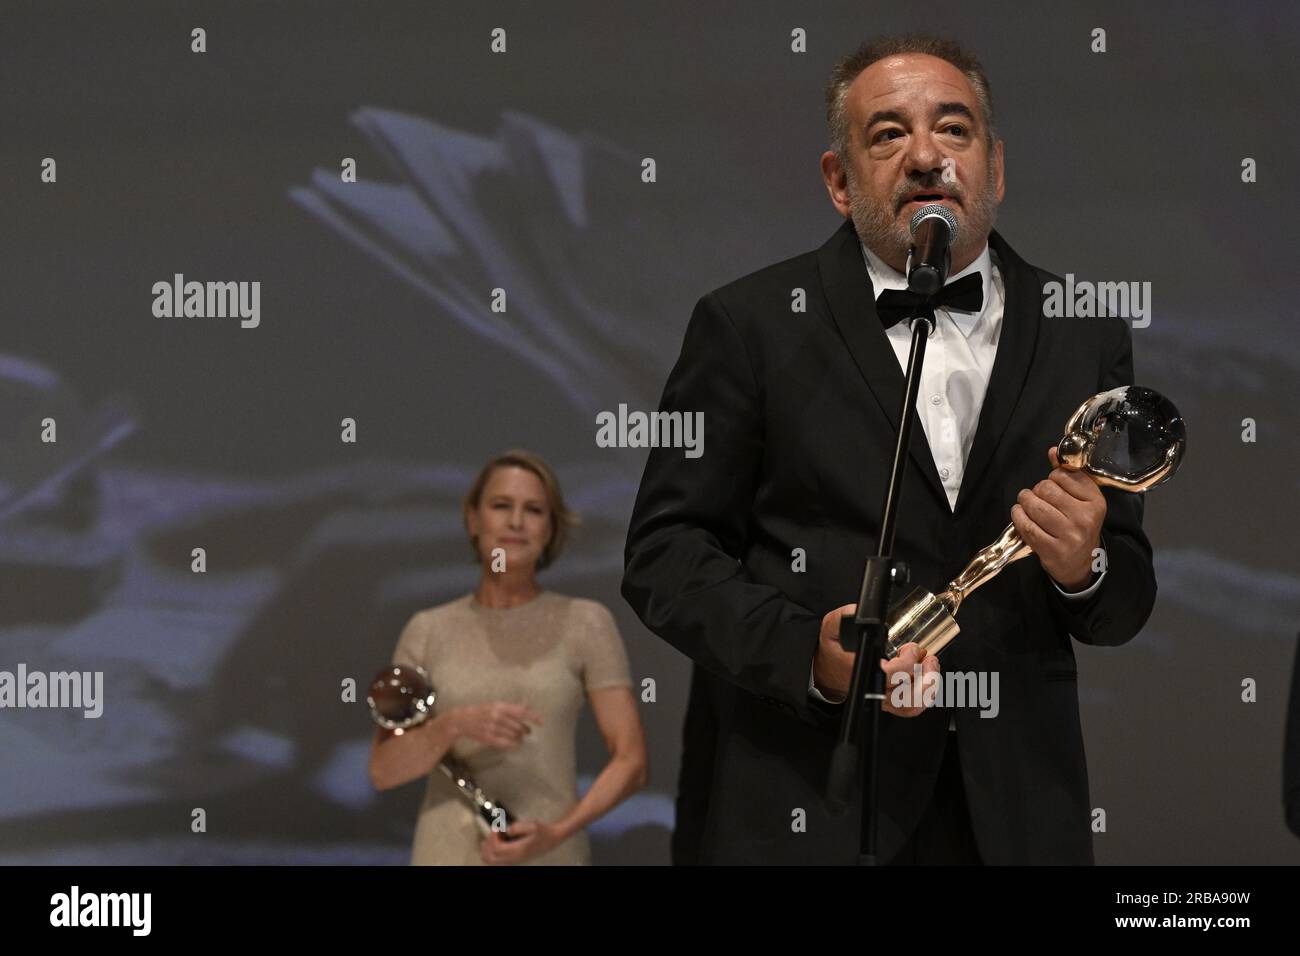 Karlovy Vary, Czech Republic. 08th July, 2023. The last day of the 57th Karlovy Vary International Film Festival, July 8, 2023. Bulgarian director Stephan Komandarev receives the Crystal Globe at the closing ceremony for his film Blazha's Lessons. In the background is American actress Robin Wright, who received the President's Award at the Karlovy Vary International Film Festival. Credit: Katerina Sulova/CTK Photo/Alamy Live News Stock Photo